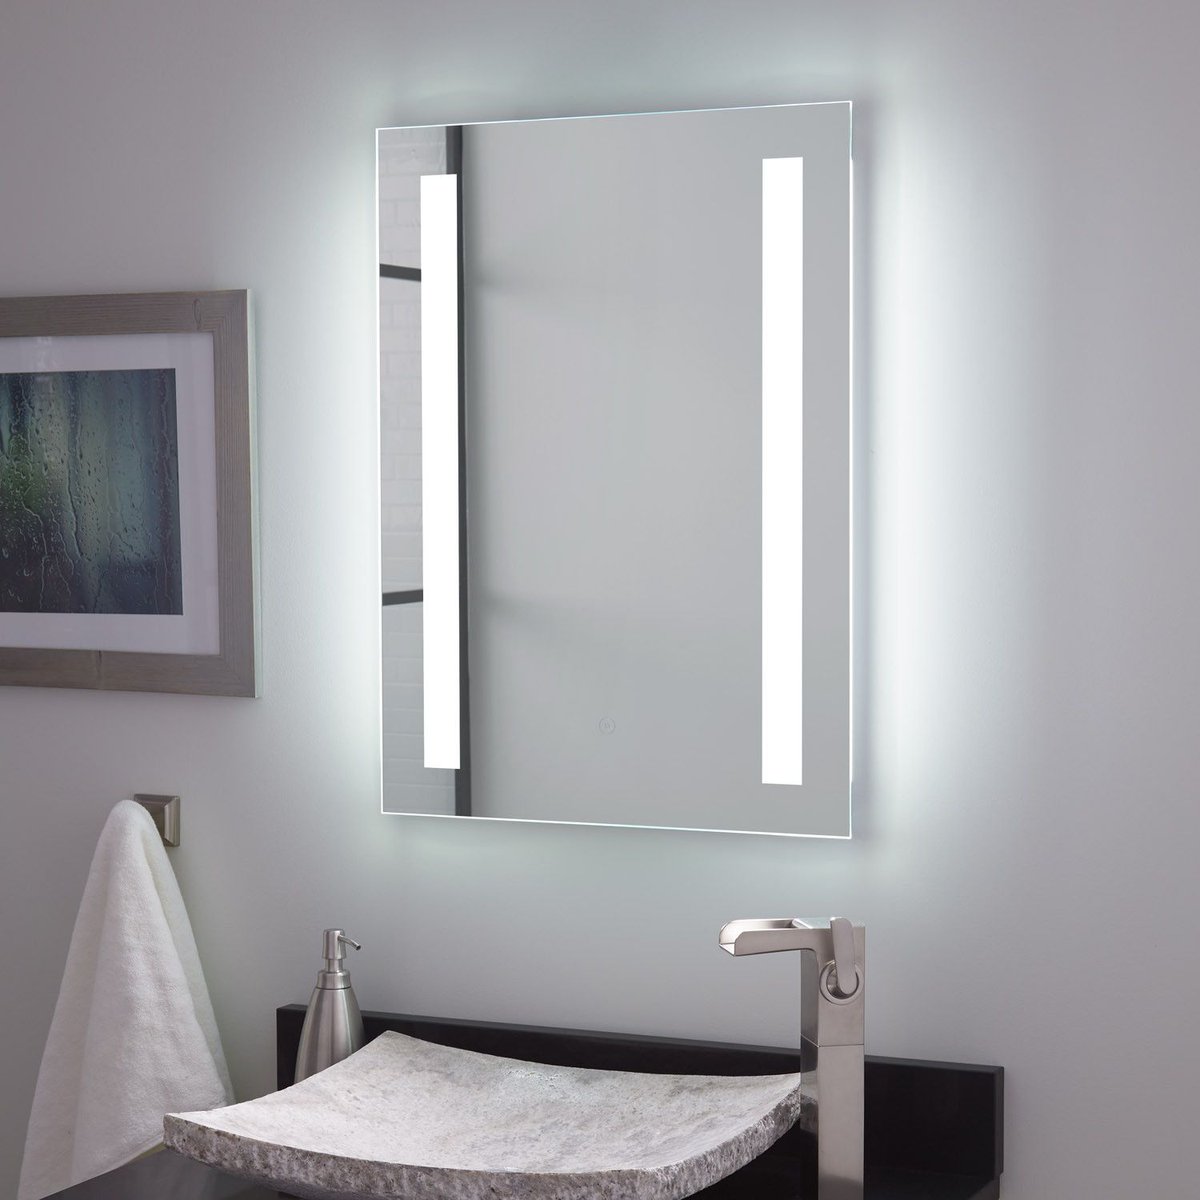 Say goodbye to outdated and dim mirrors, and upgrade to a high-end LED mirror today! #LEDMirror #HighEndBeauty #ElevateYourRoutine  #LightedMirror #SARINLighting #SARINEnergy  #ADAMirror